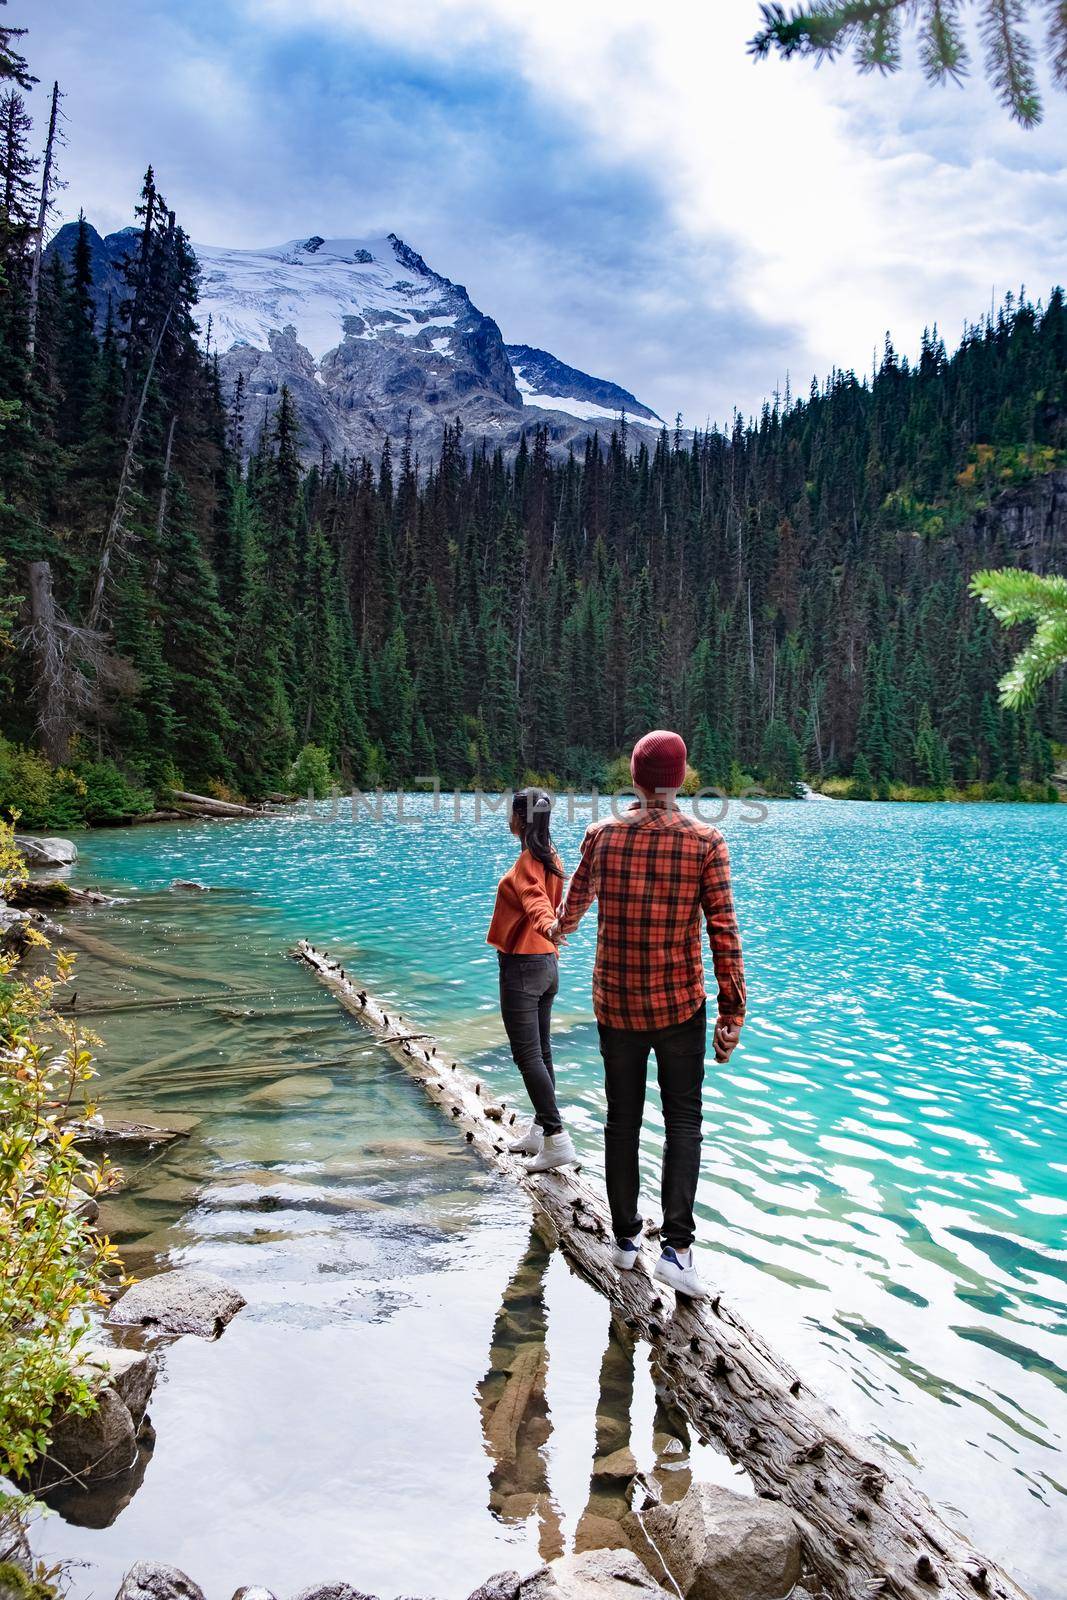 Majestic mountain lake in Canada. Upper Joffre Lake Trail View, couple visit Joffre Lakes Provincial Park - Middle Lake. British Columbia Canada, couple men and woman hiking by the lake